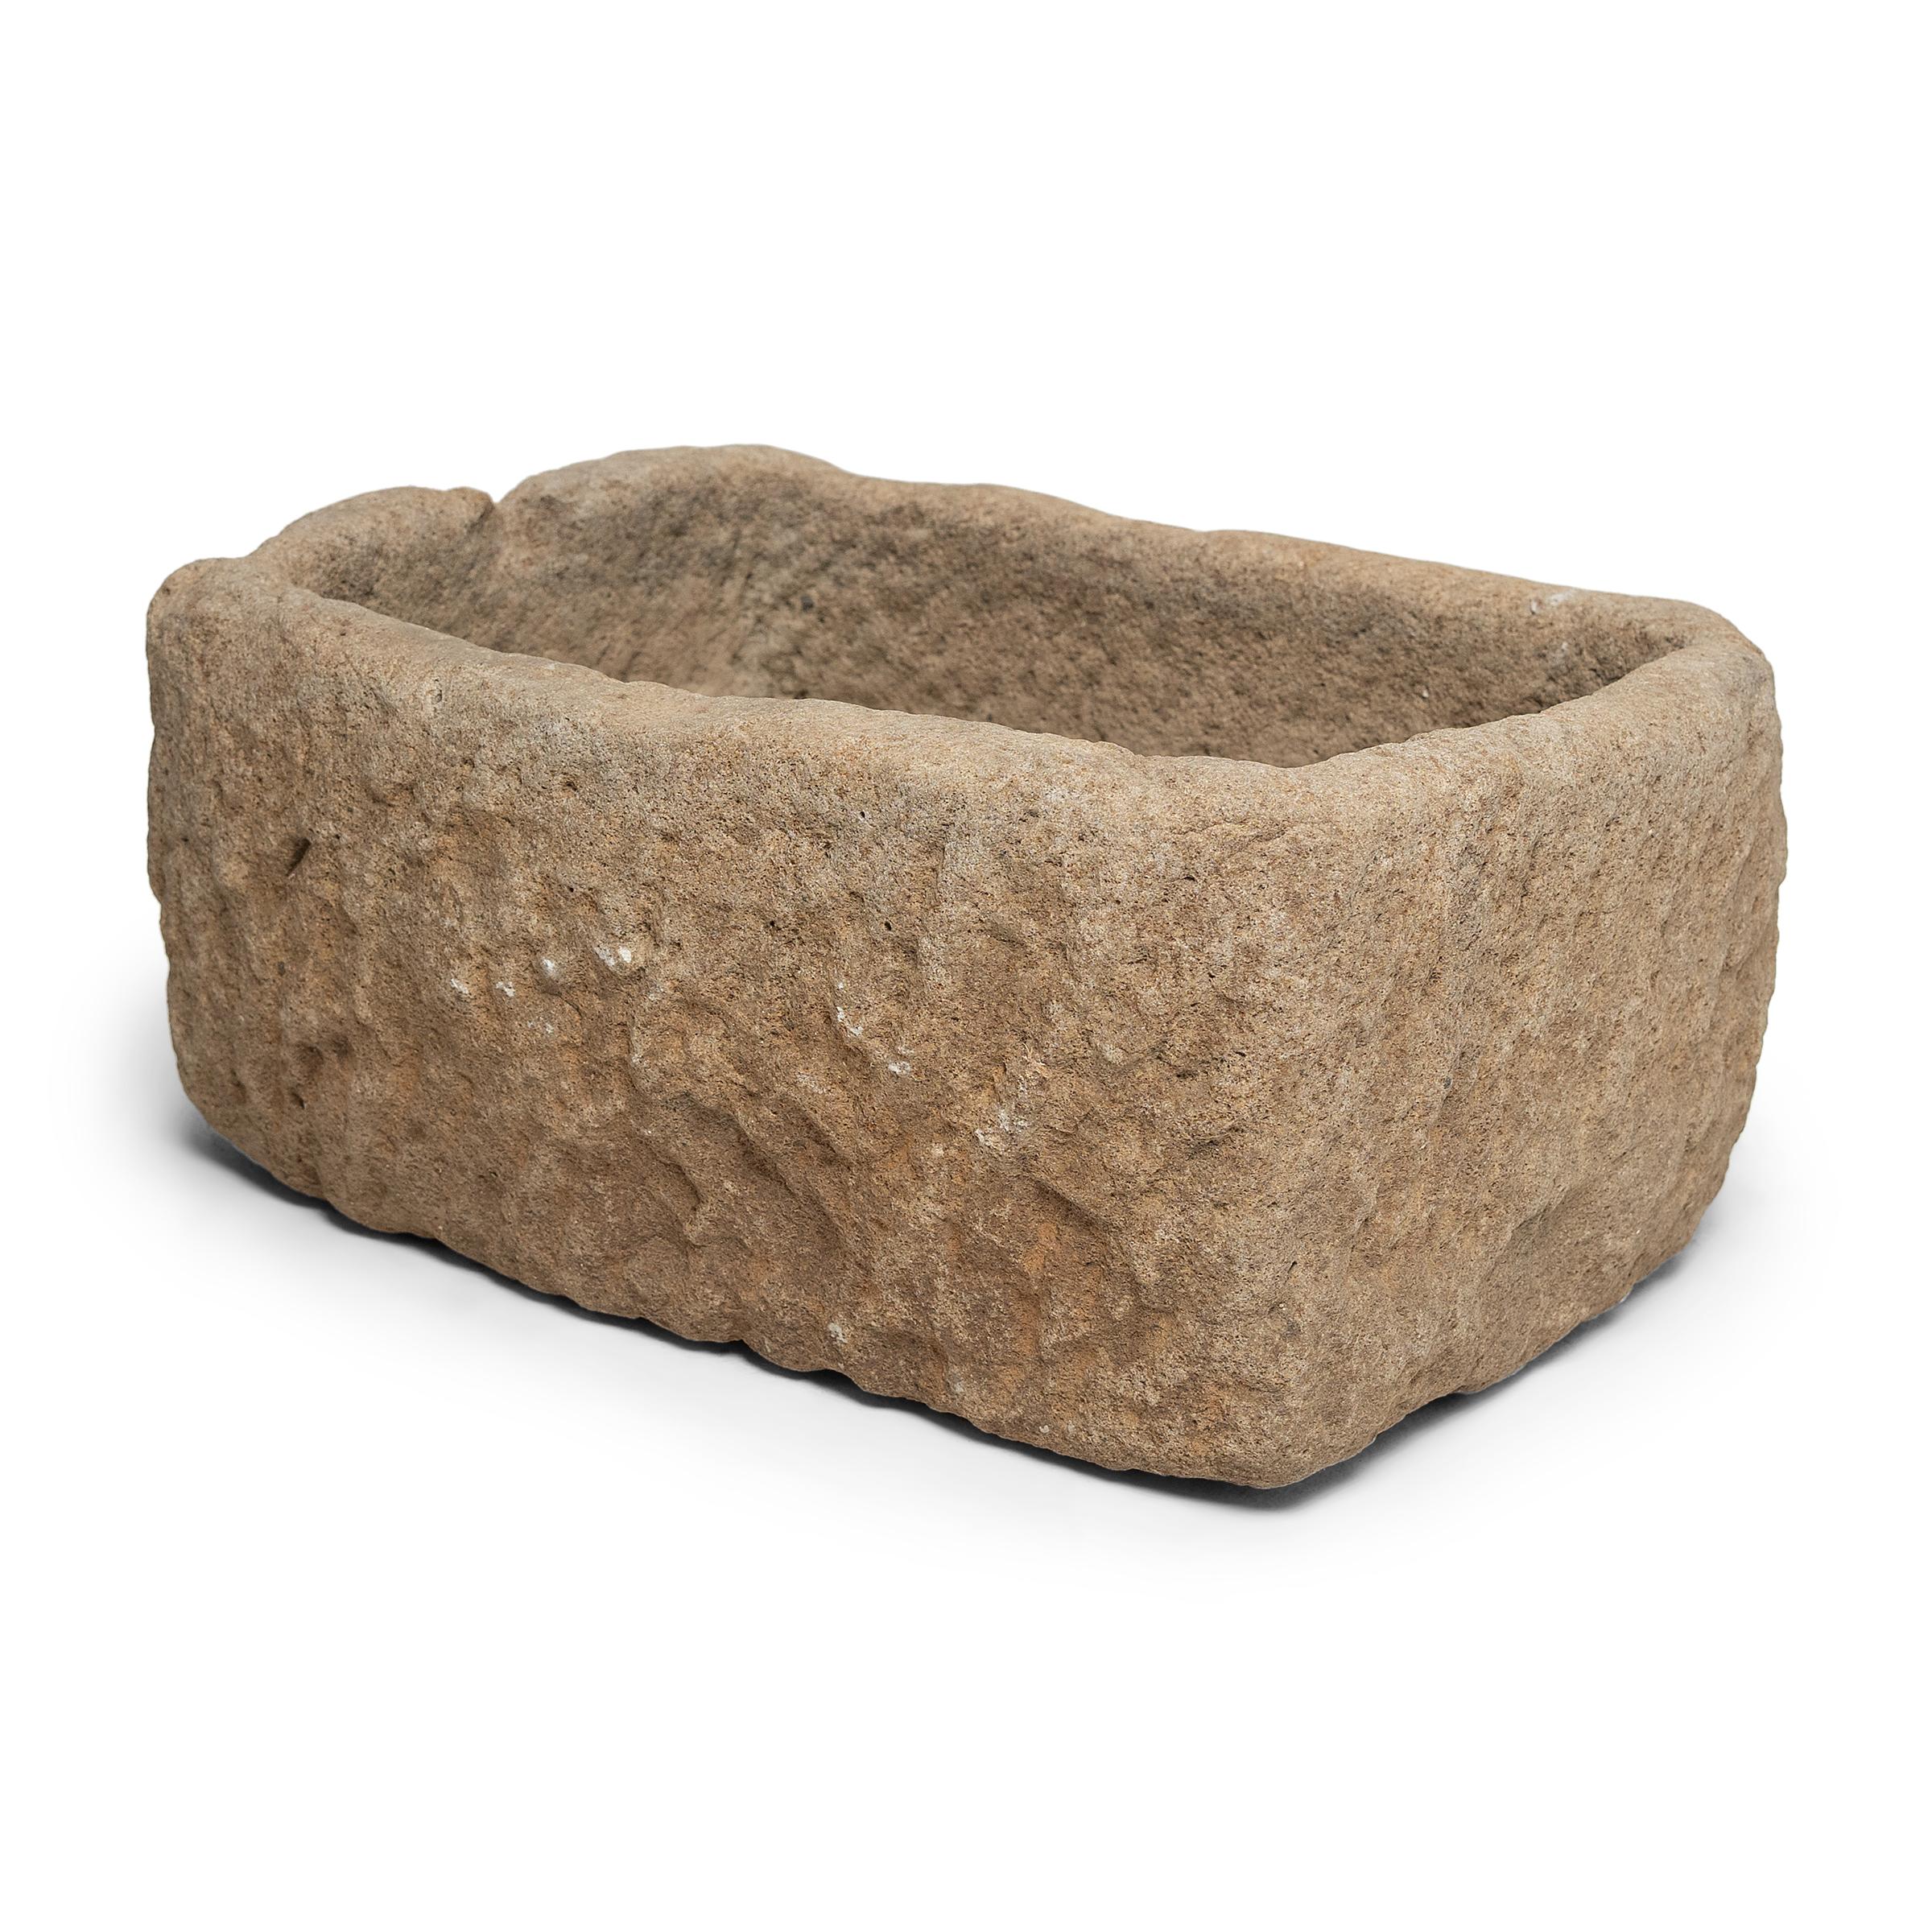 Once used on a provincial Chinese farm to hold water or animal feed, this early 20th century stone trough is celebrated today for its organic form and rustic authenticity. The trough is hand-carved from solid limestone with a rectangular form,